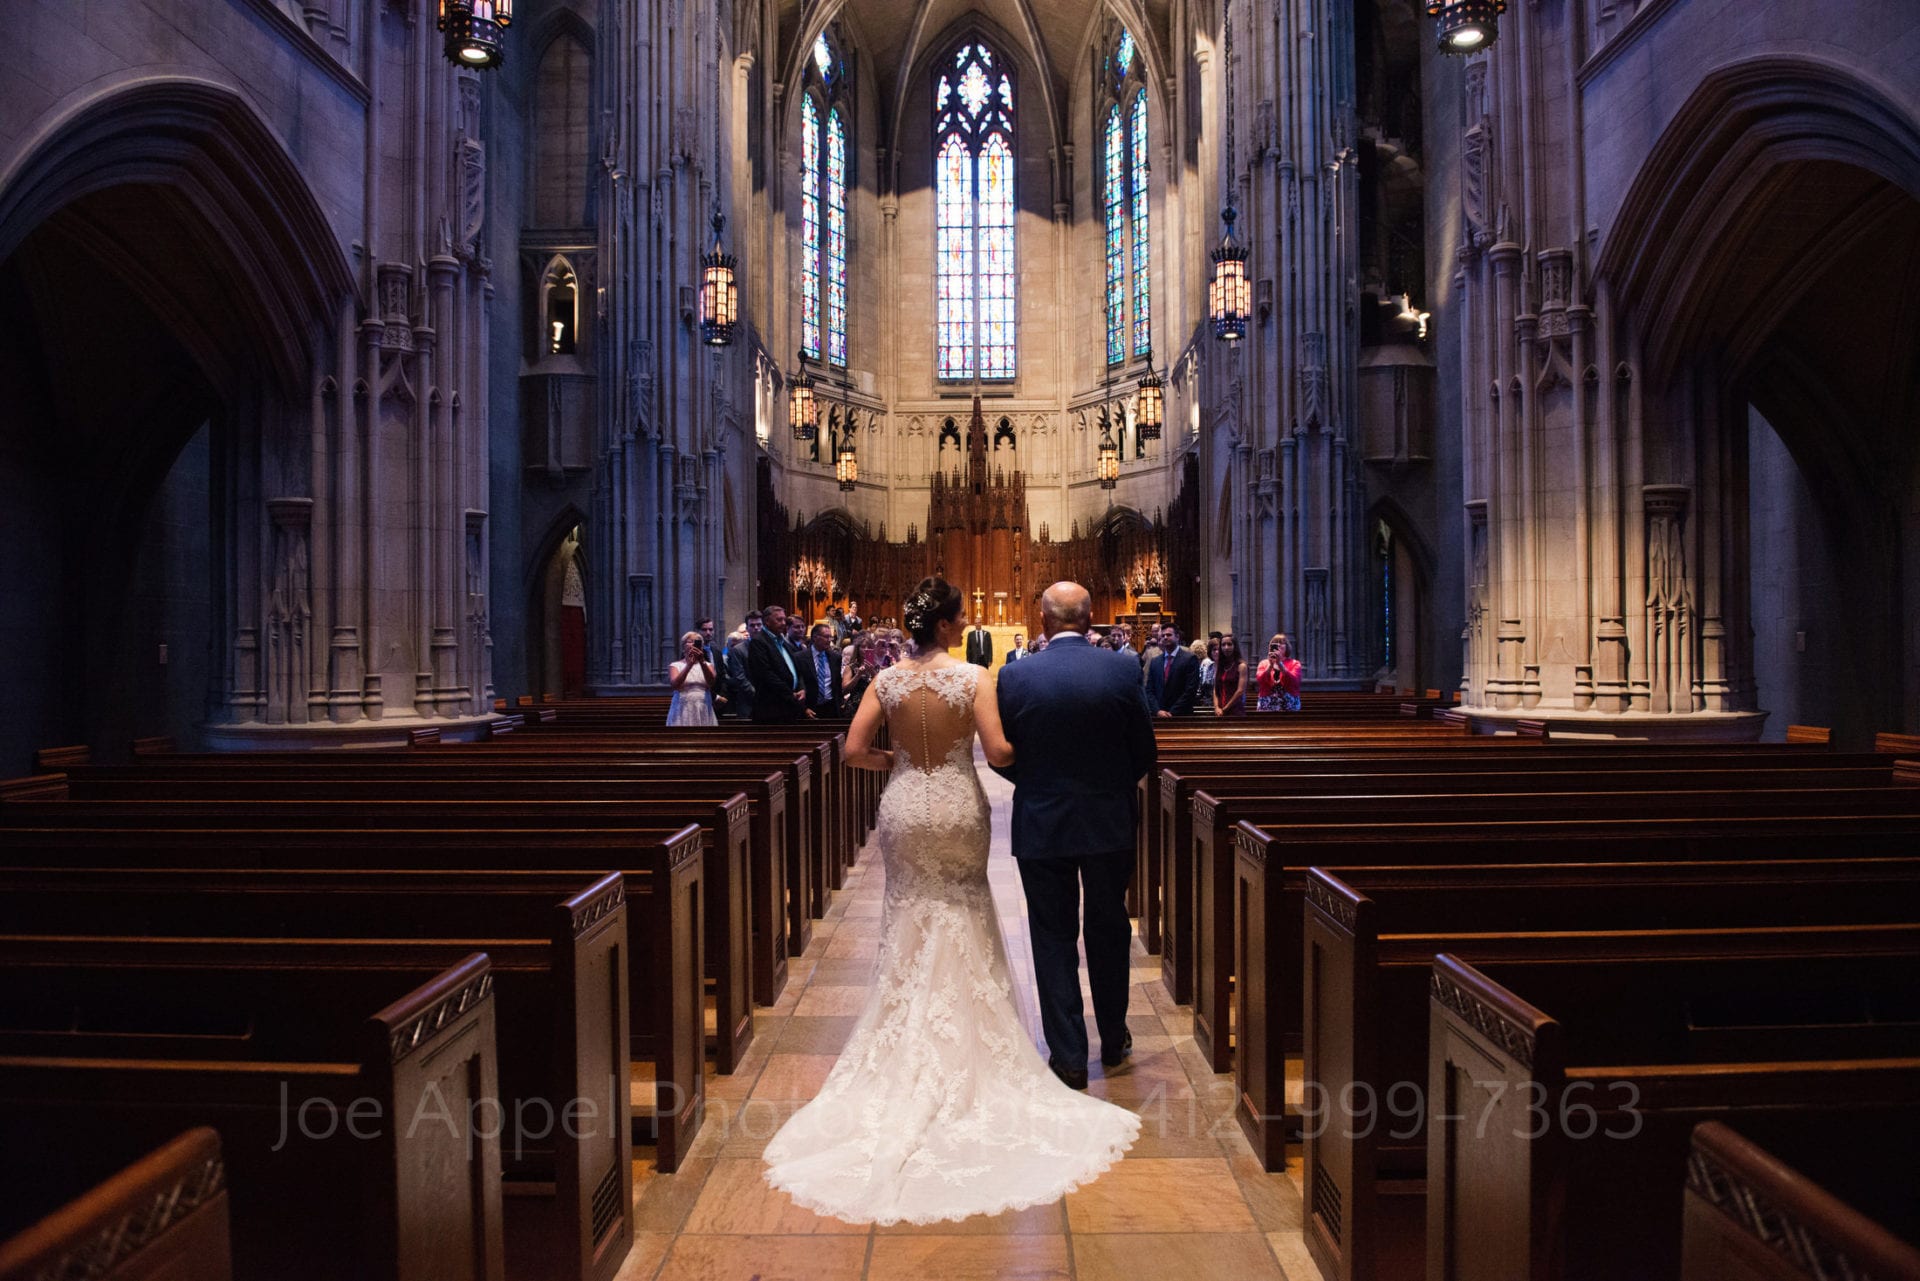 The interior of Heinz Chapel as seen from the back of the church as a bride and her father walk down the aisle at her Heinz Chapel and LeMont Wedding.